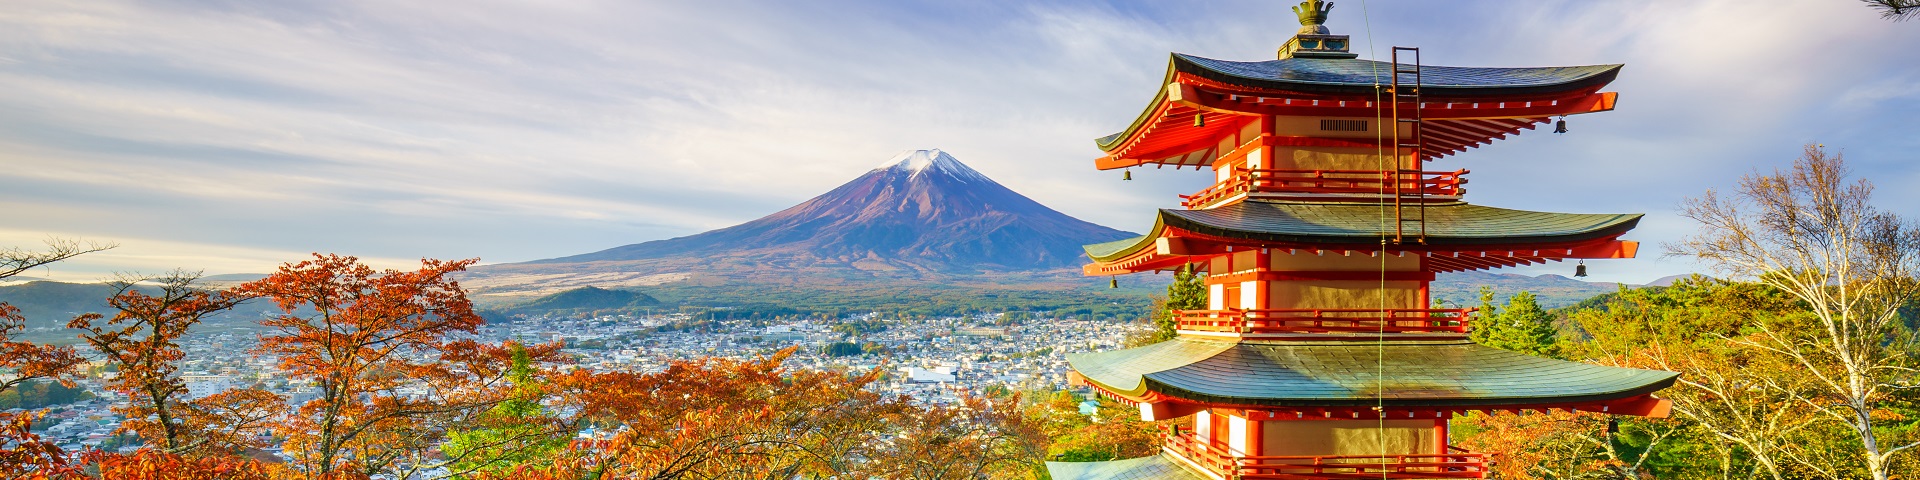 Essential Places to Visit in Japan